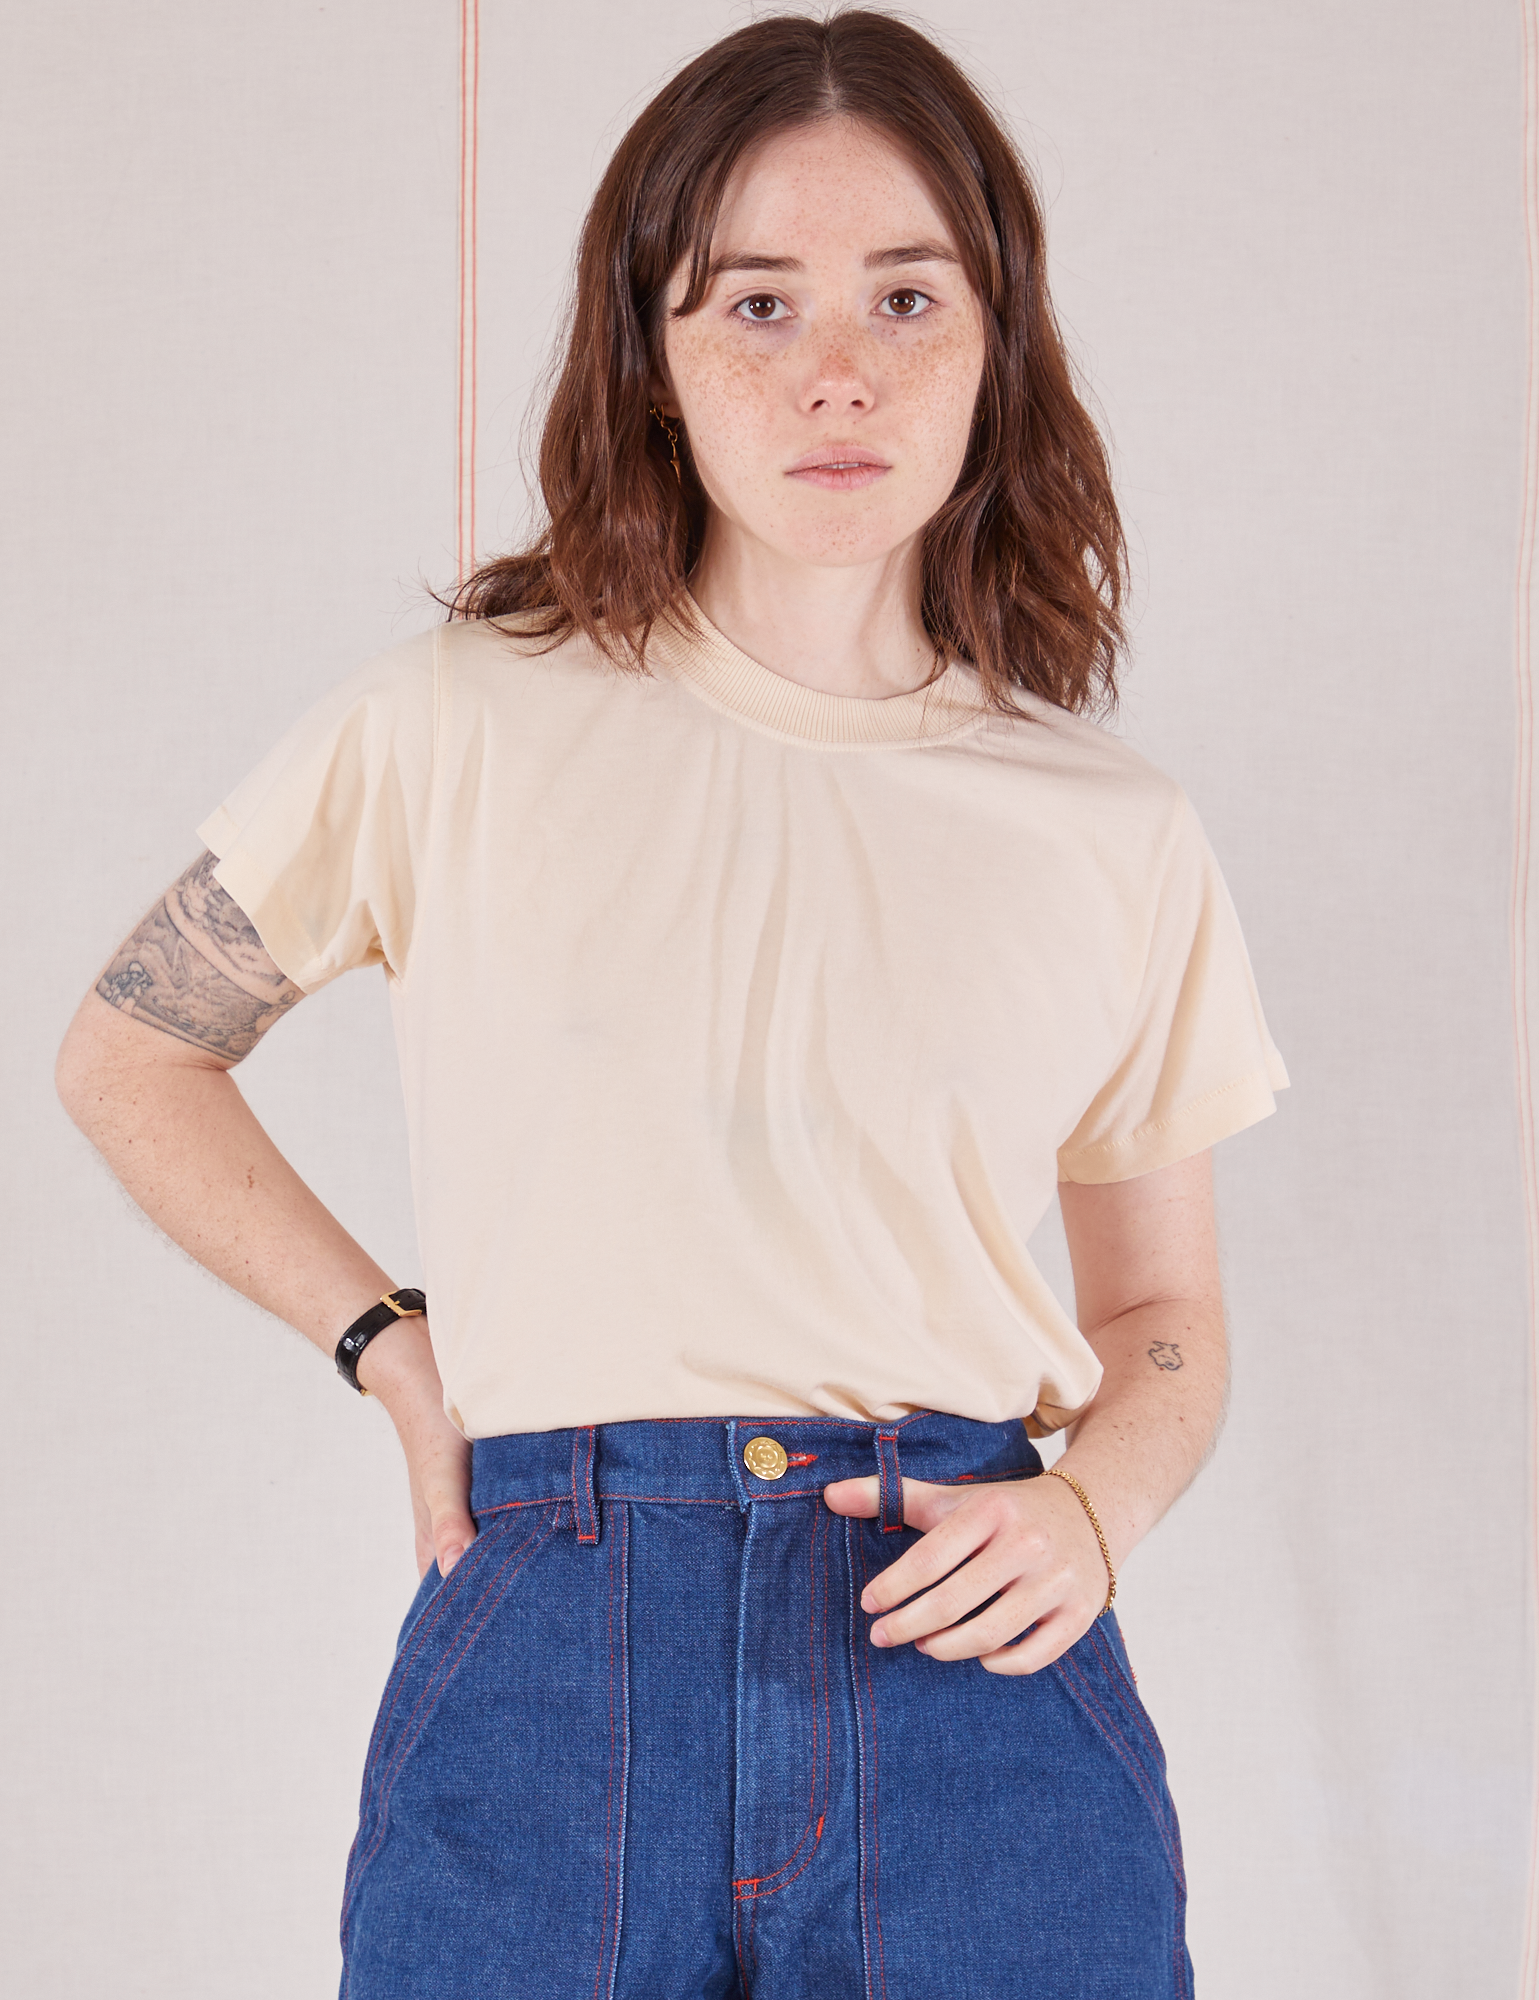 Hana is 5'3" and wearing P Organic Vintage Tee in Vintage Tee Off-White tucked into dark wash Carpenter Jeans